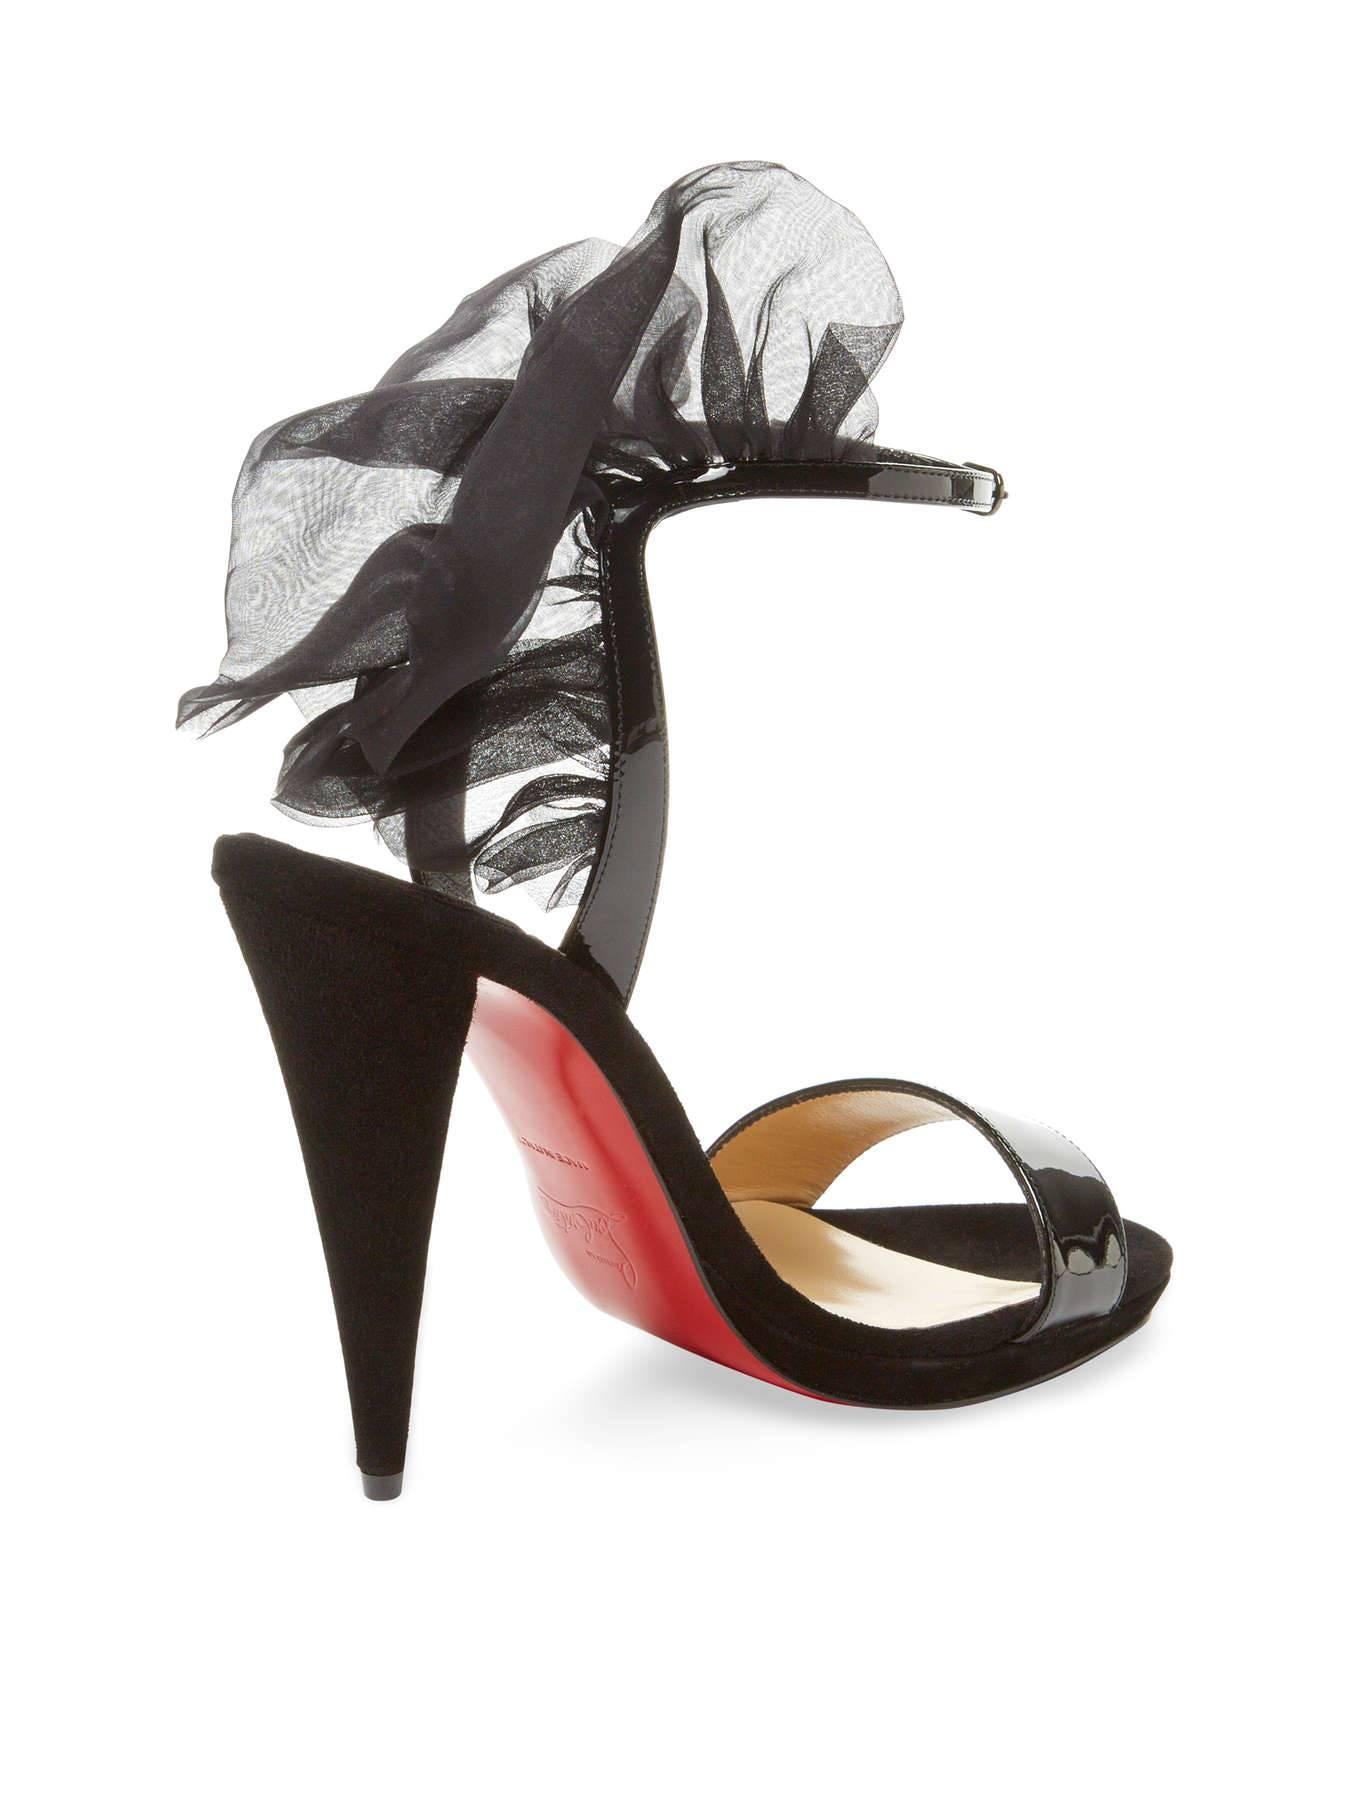 Christian Louboutin New Sold Out Black Patent Evening Sandals Heels in Box 1